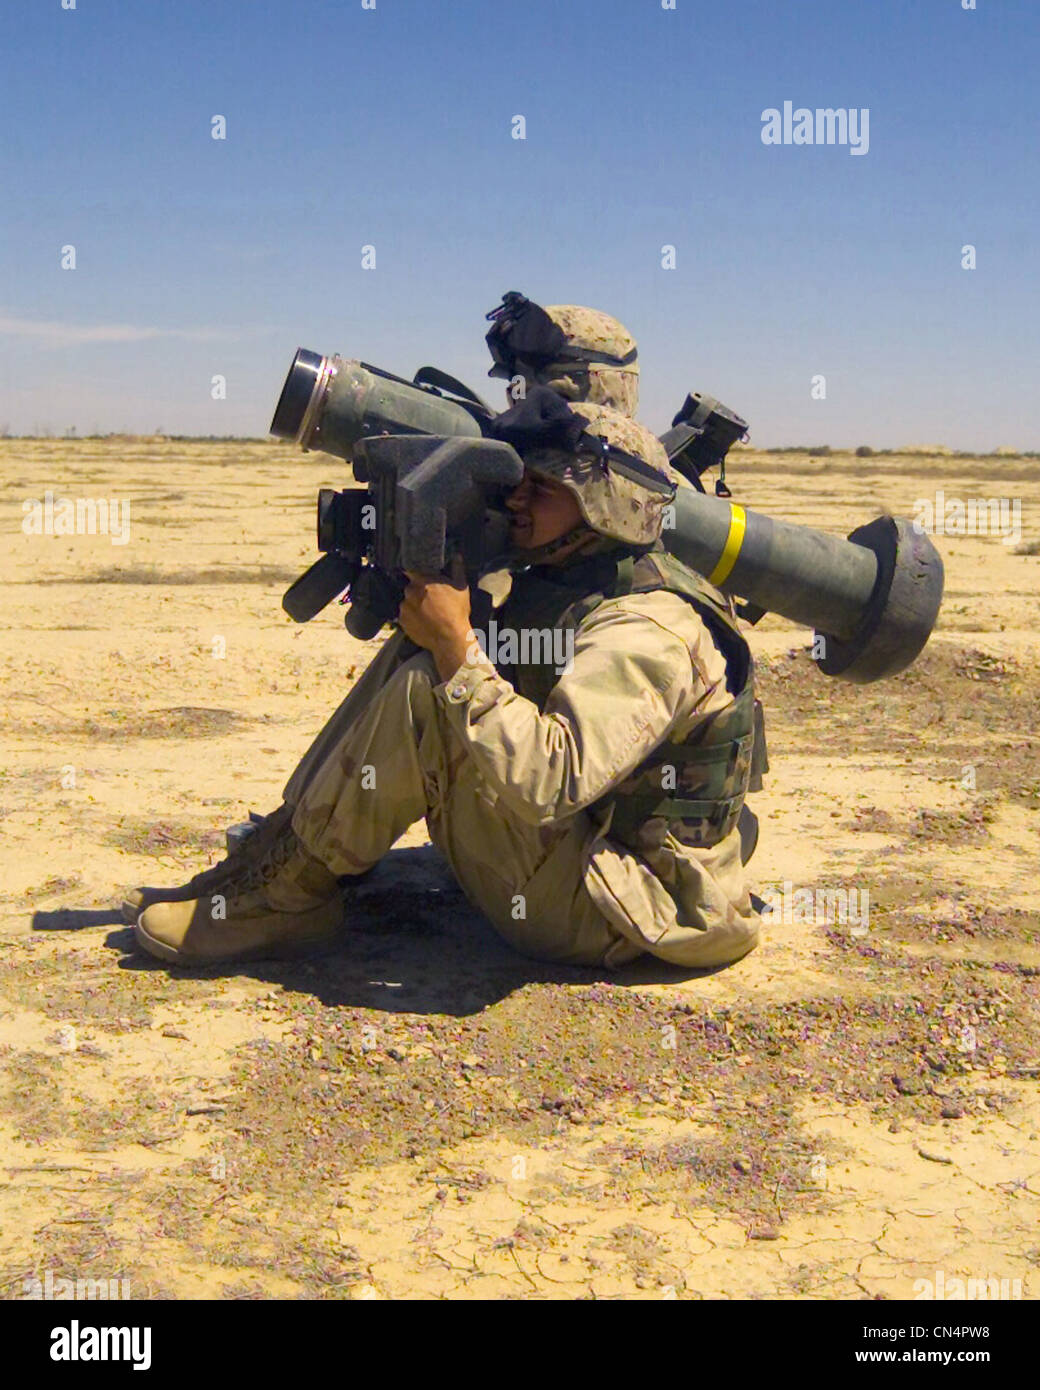 Two US Marine Corps (USMC) members with the 2nd Battalion, 6th Marines fire a Javelin anti-tank missile, at Blair airfield, Iraq, in support of Operation IRAQI FREEDOM. Stock Photo